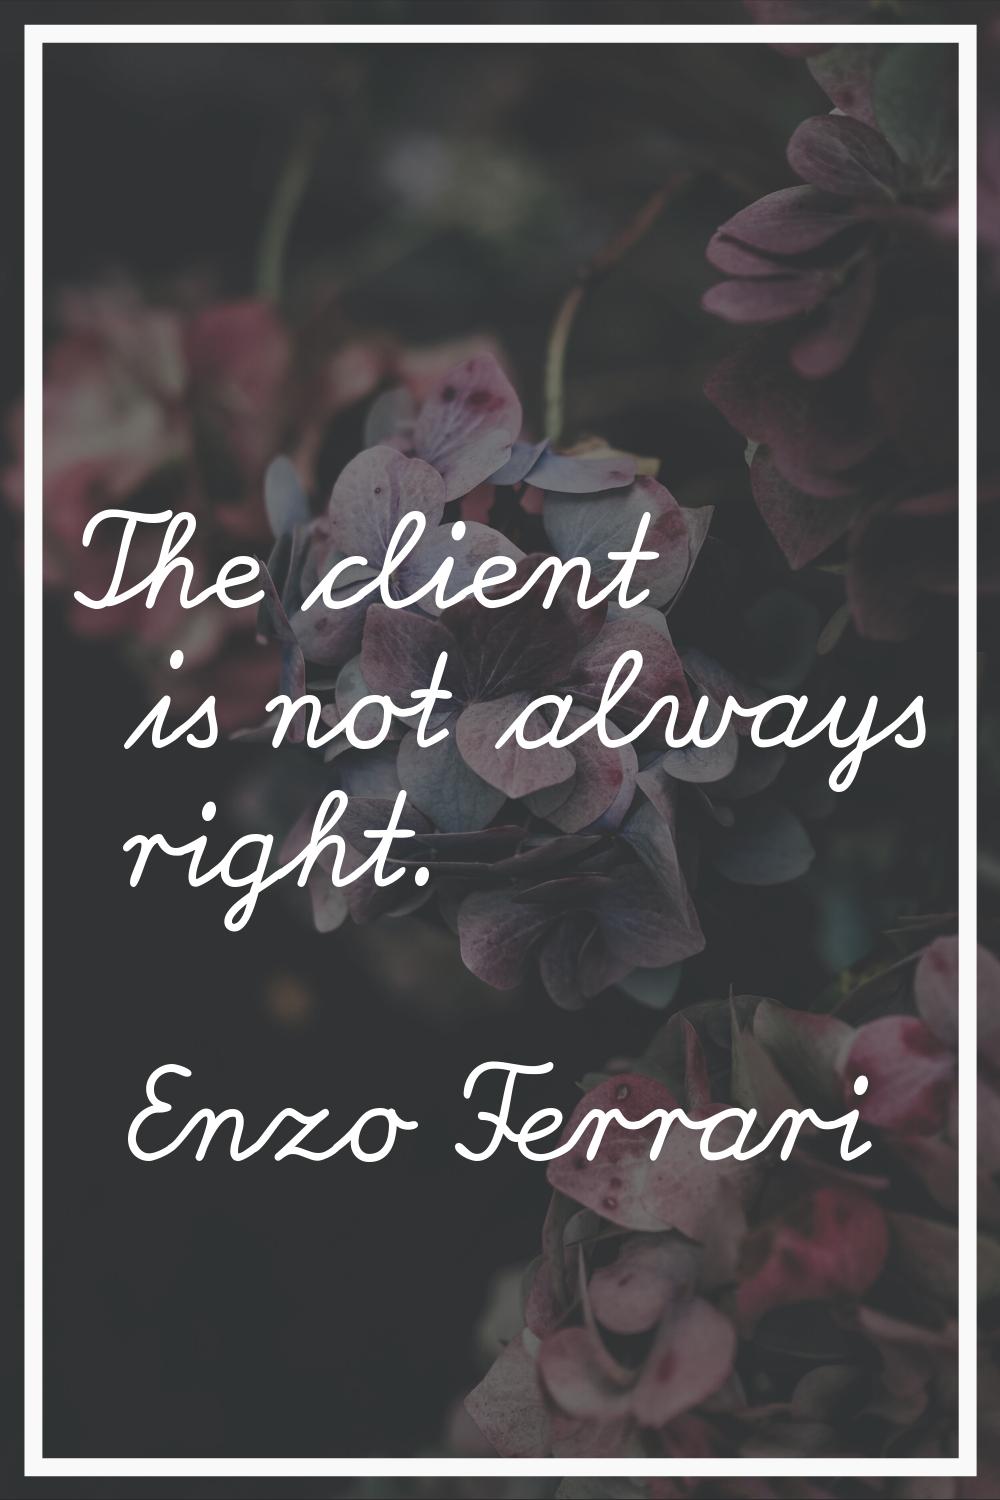 The client is not always right.